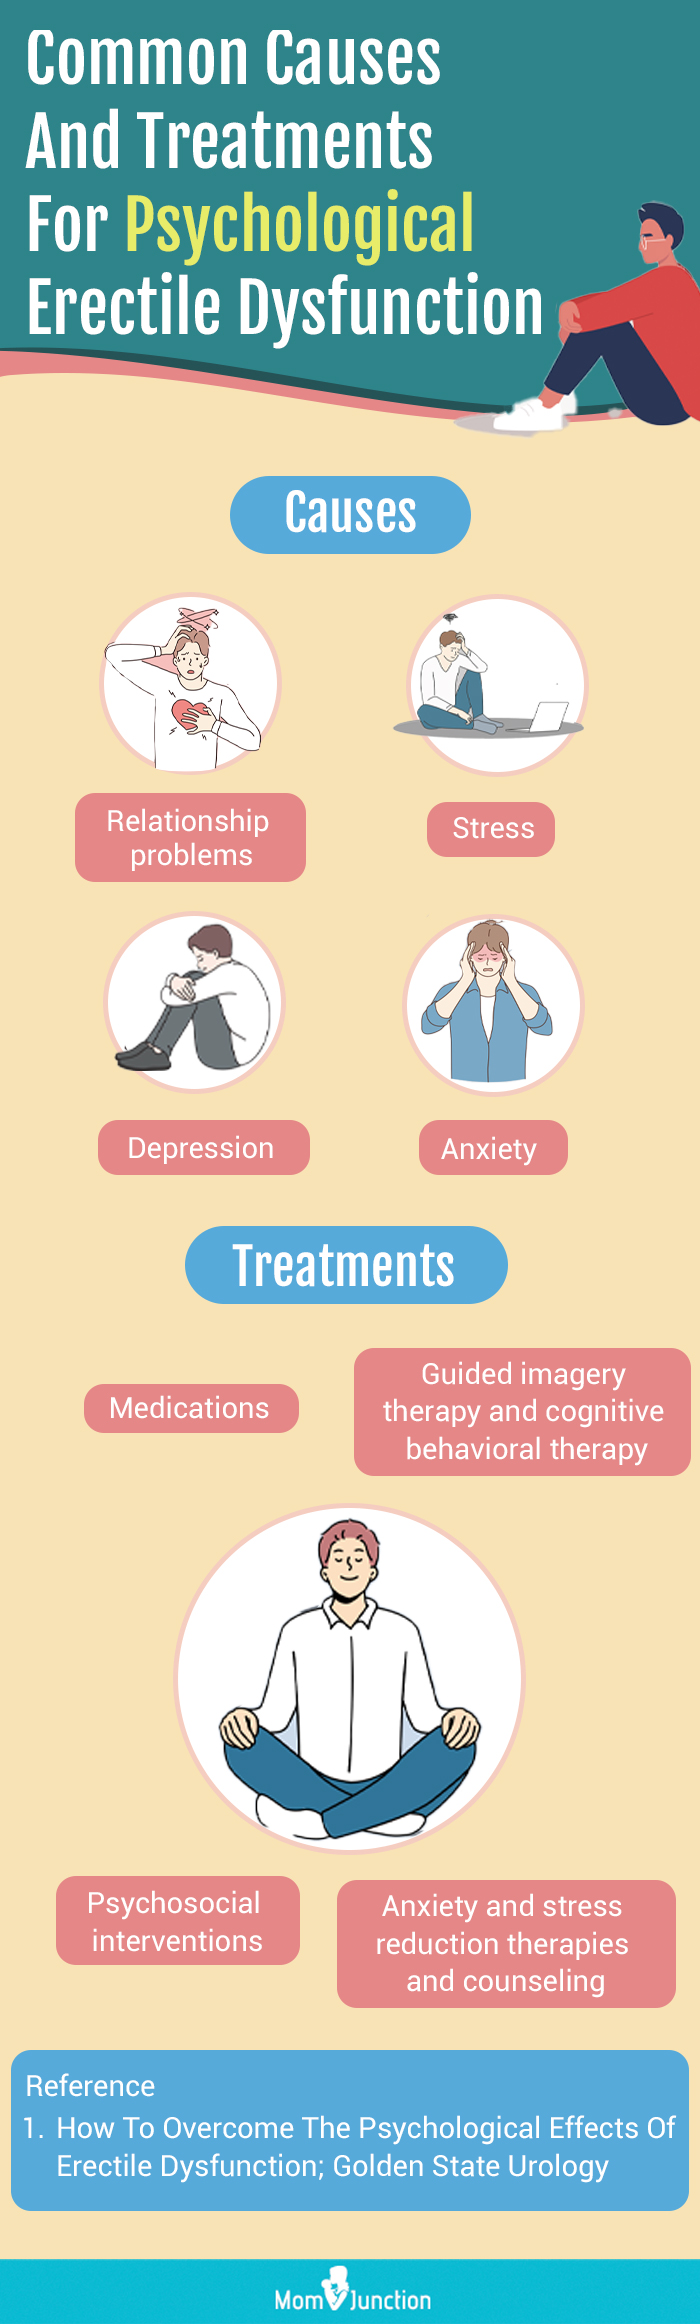 treatments of psychological erectile dysfunction in teens (infographic)